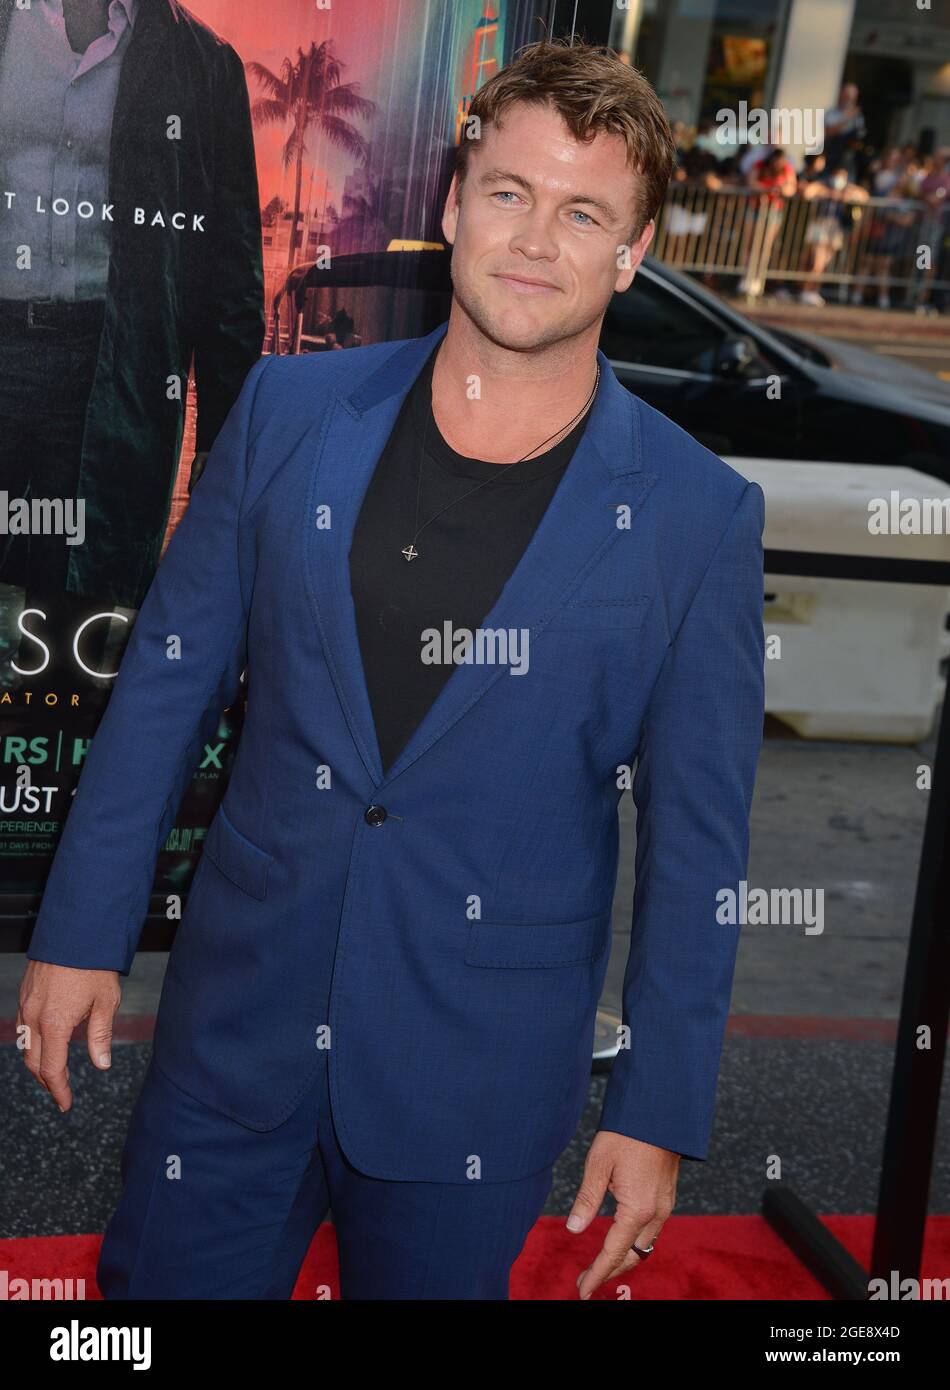 Los Angeles, USA. 18th Aug, 2021. Luke Hemsworth 063 arrives at Warner Bros. Pictures 'Reminiscence' Los Angeles Premiere at TCL Chinese Theatre on August 17, 2021 in Hollywood, California Credit: Tsuni/USA/Alamy Live News Stock Photo